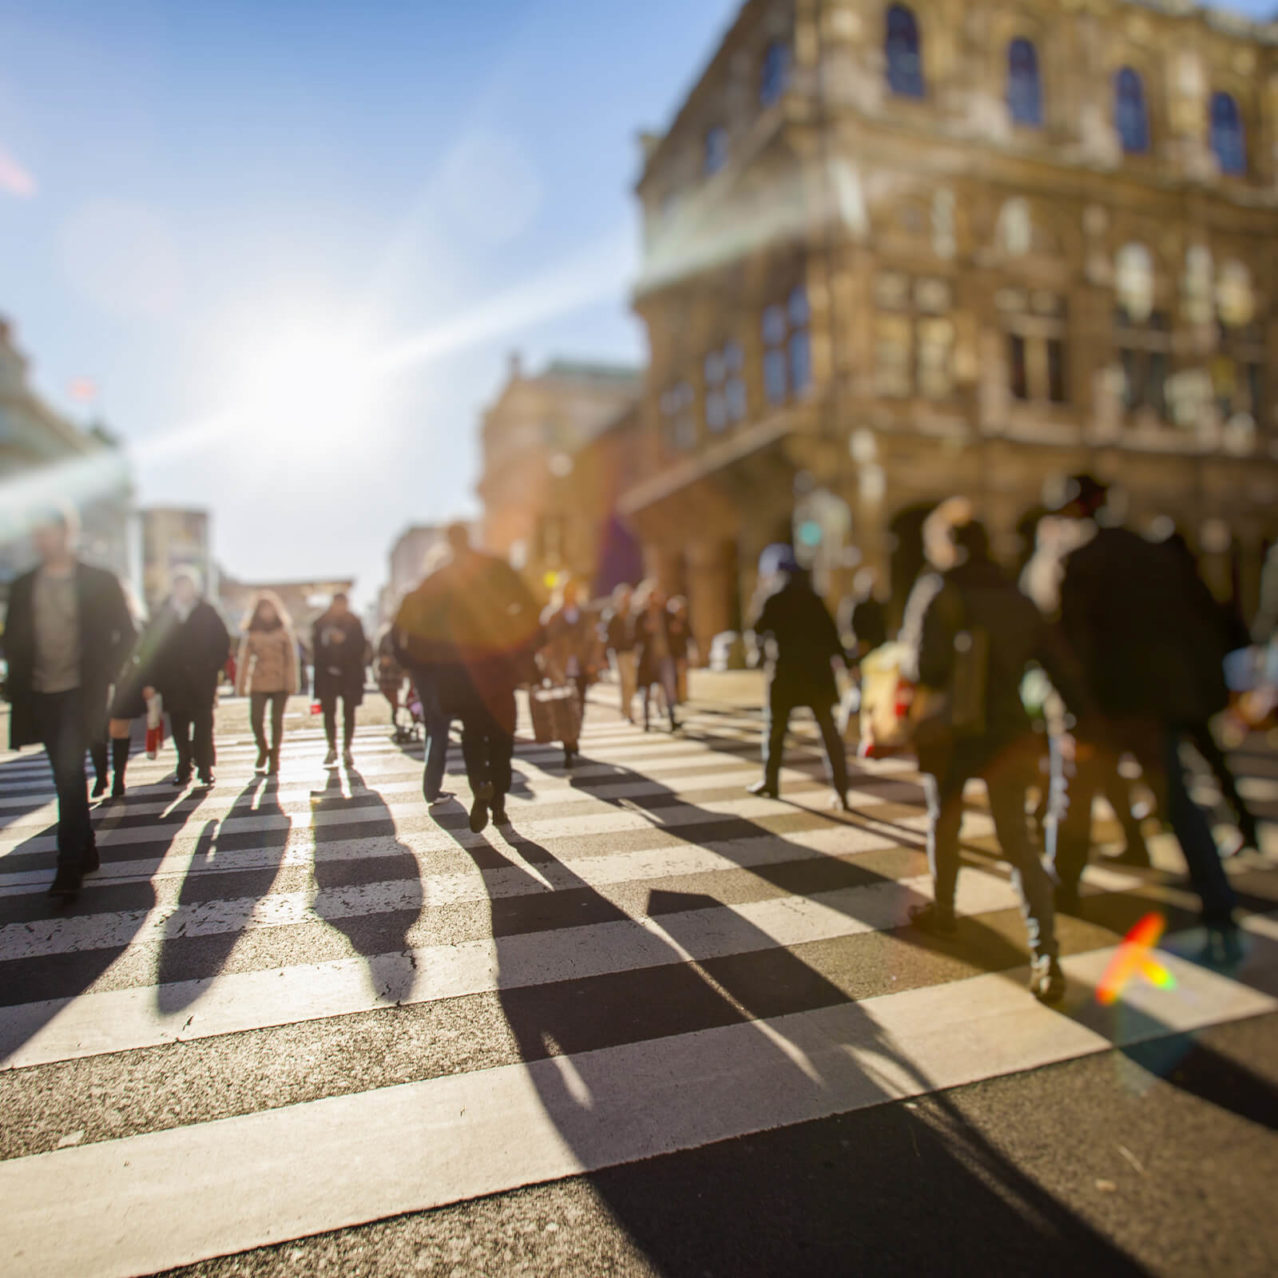 Blurred image of a busy pedestrian crossing in a city